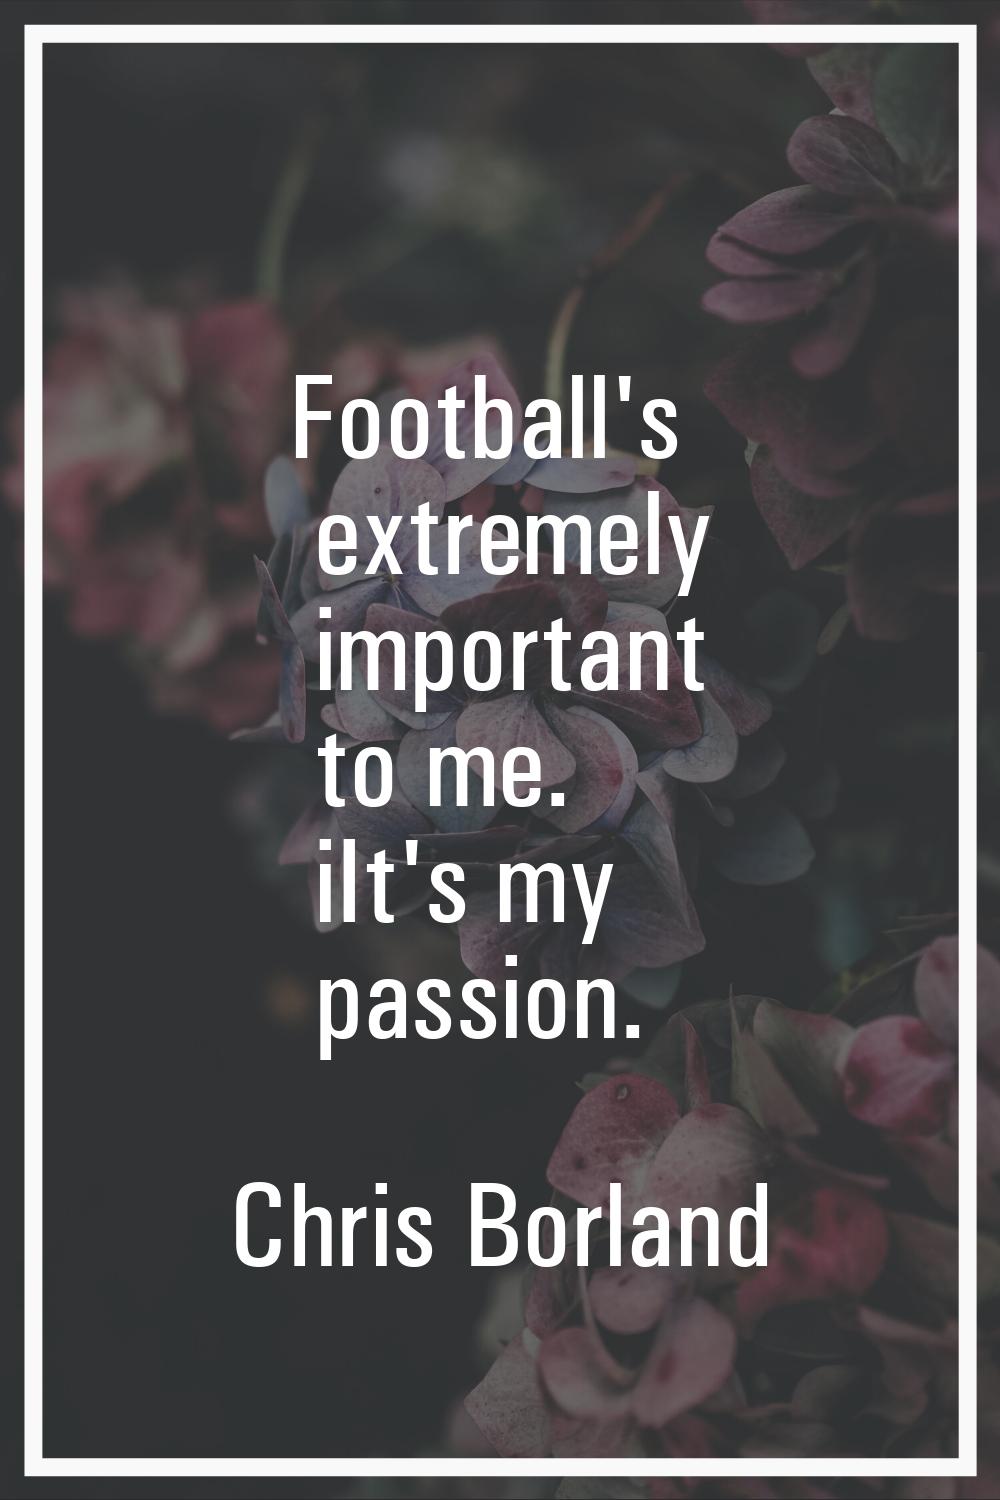 Football's extremely important to me. iIt's my passion.